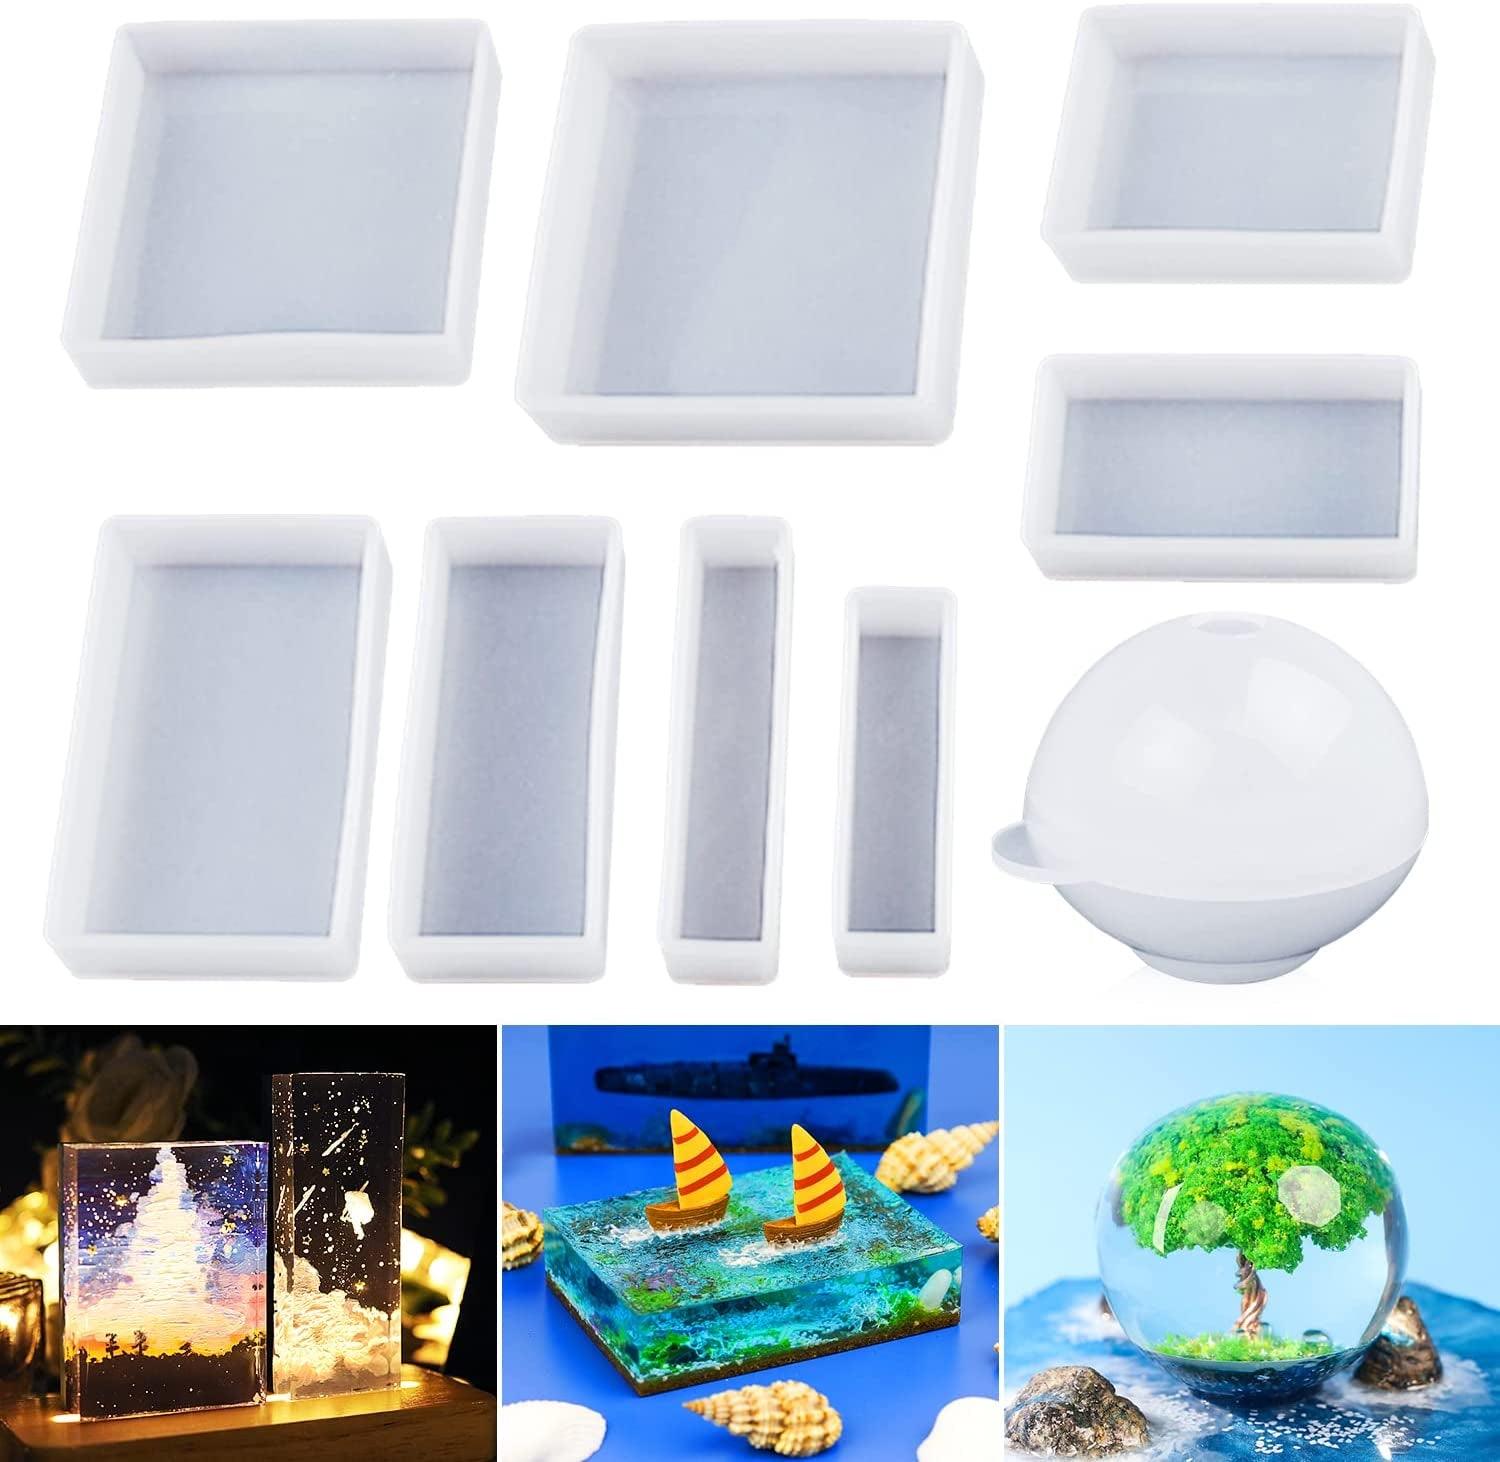 Large Resin Molds Silicone Kit Including Deep Hexagon Heart Square